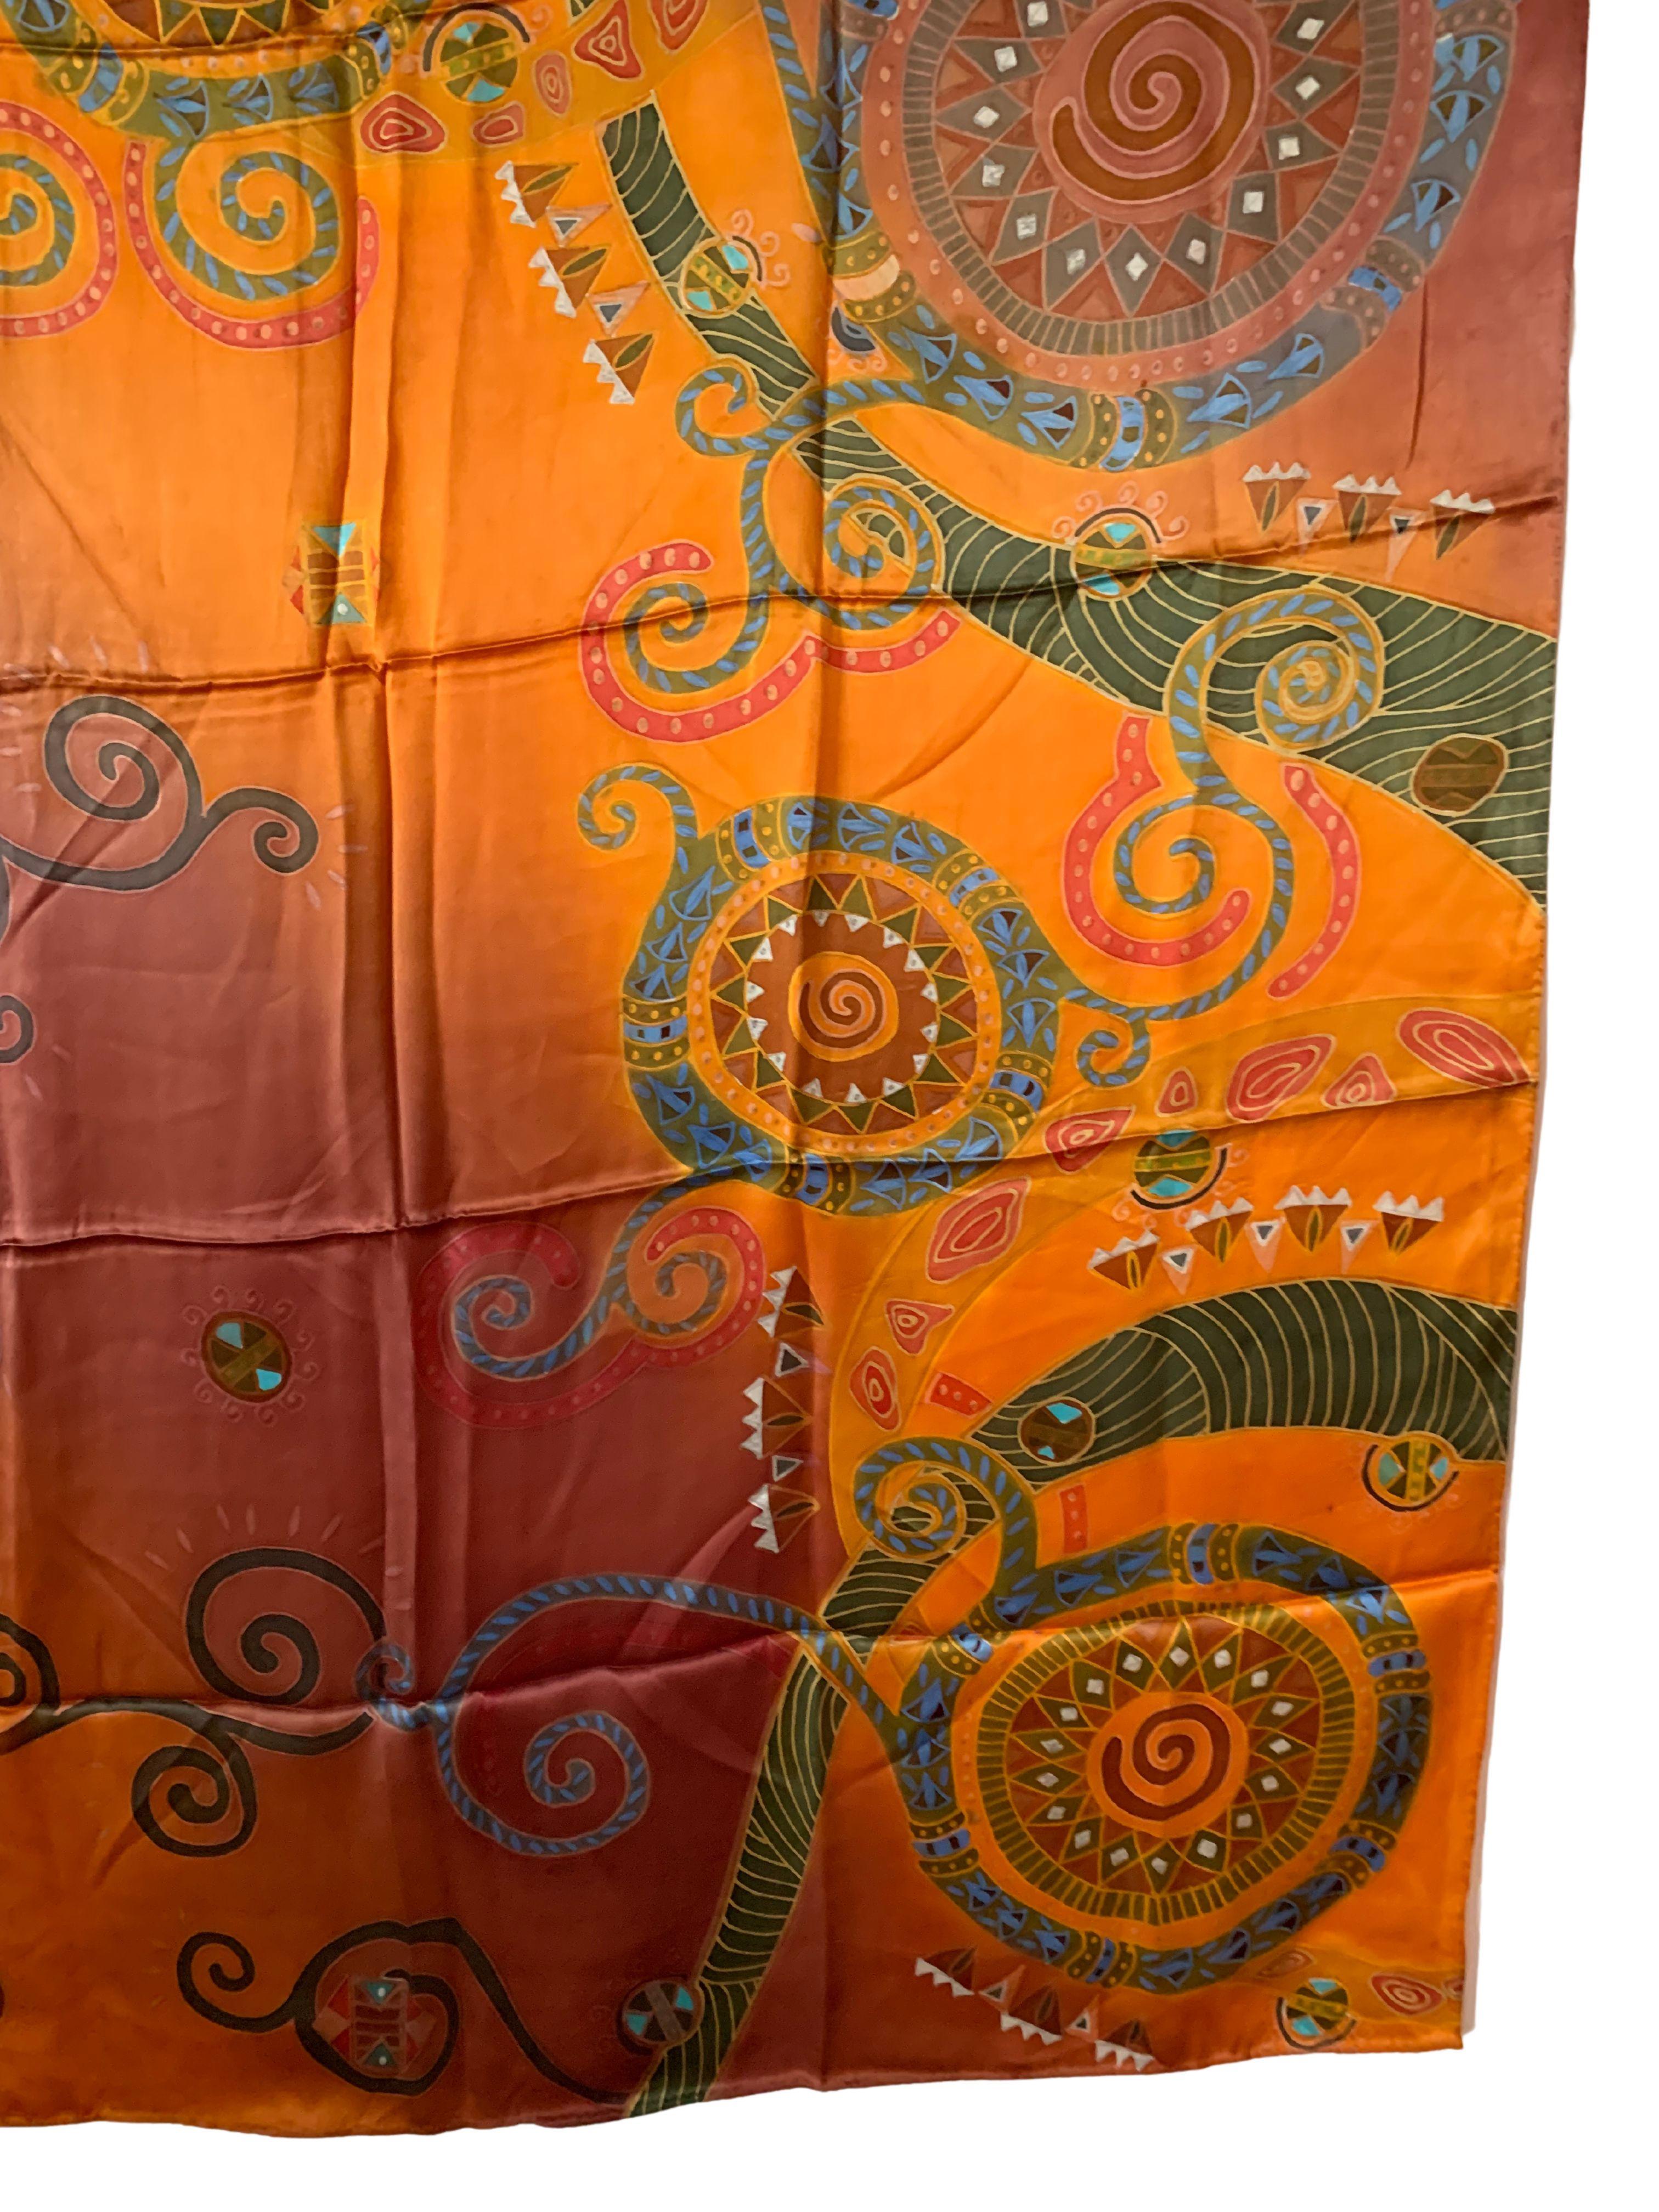 A wonderful Hand-Crafted Silk Textile from Malaysia with Stunning Detailing and shades. A wonderful decorative object to bring warmth and color to any space. This textile was hand-crafted by local weavers.